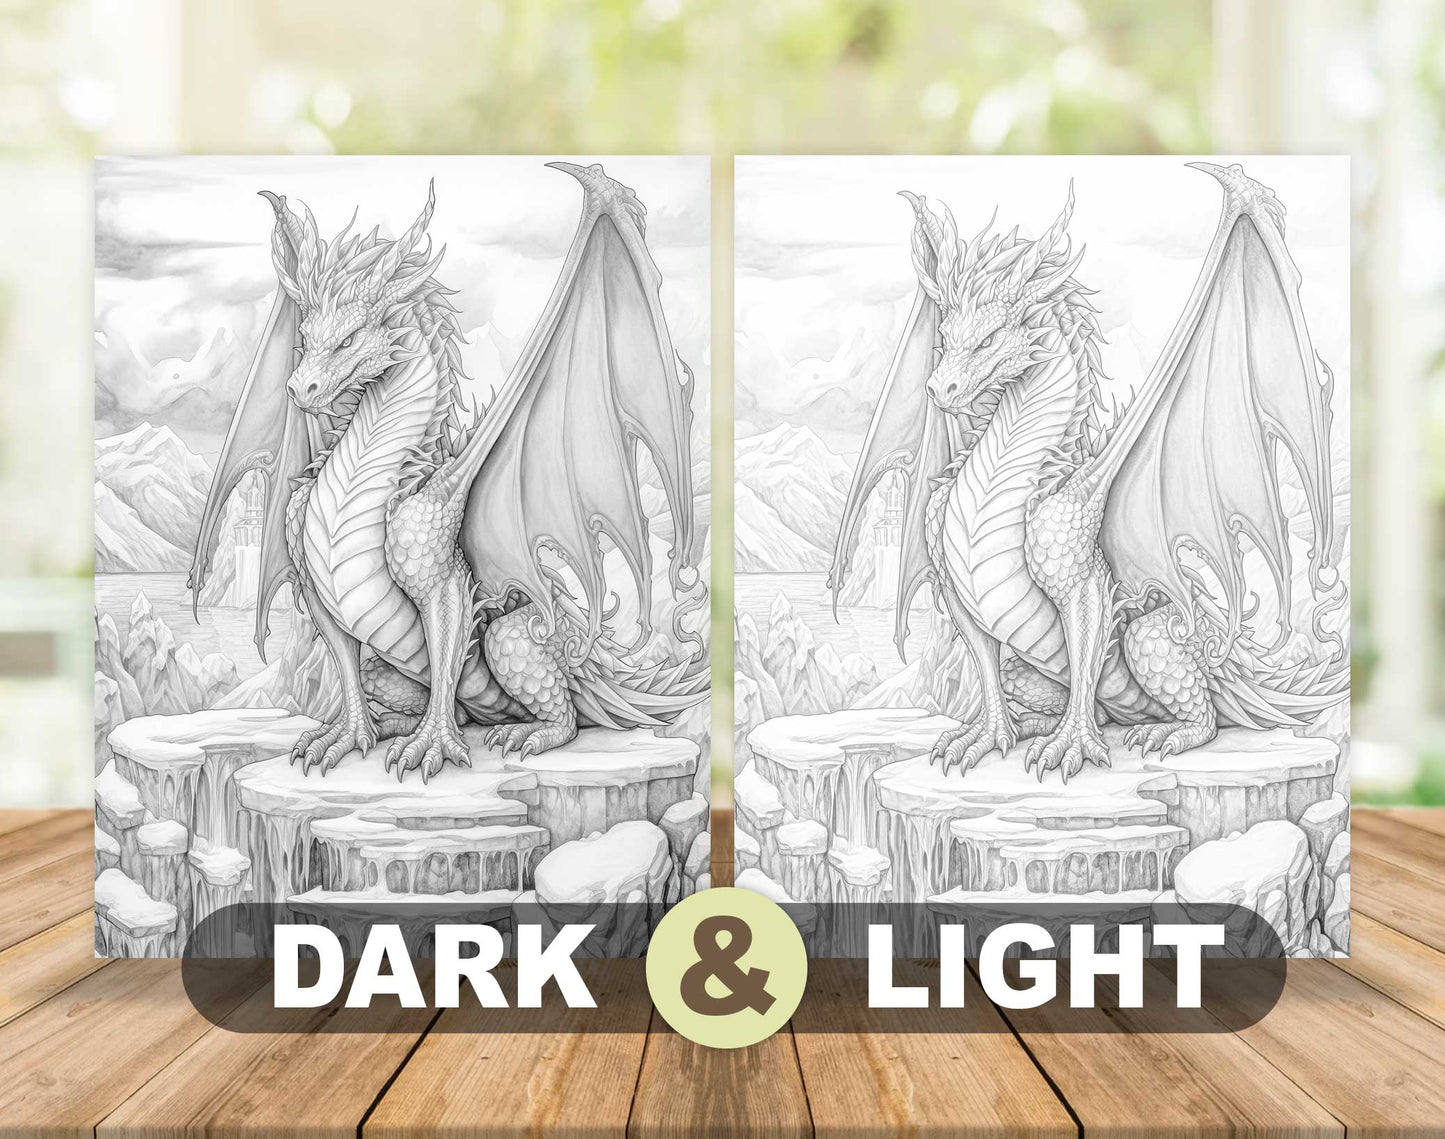 50 Winter Dragon Grayscale Coloring Pages - Instant Download - Printable PDF Dark/Light